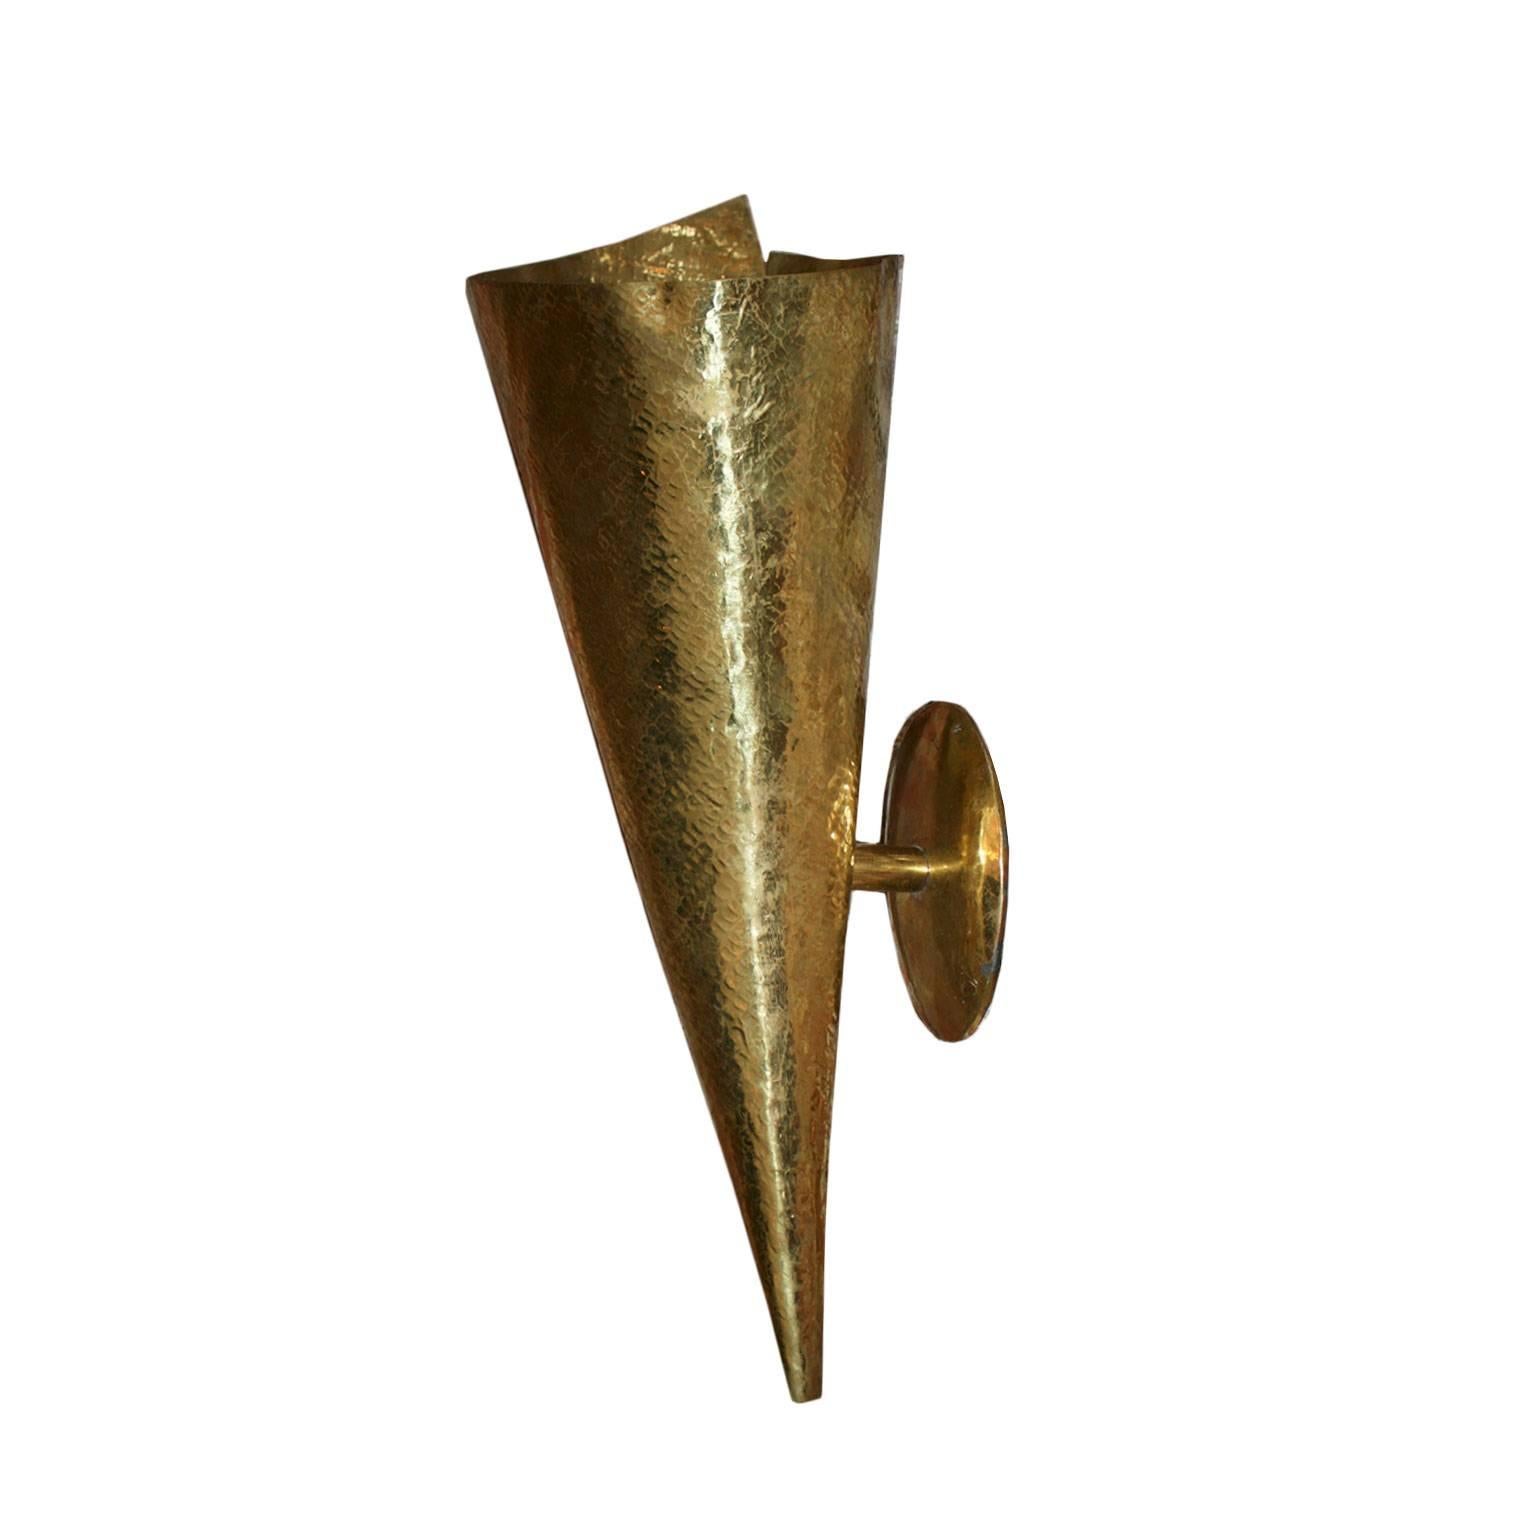 Pair of sconces made in brass with conic form and finished with hammered technique.